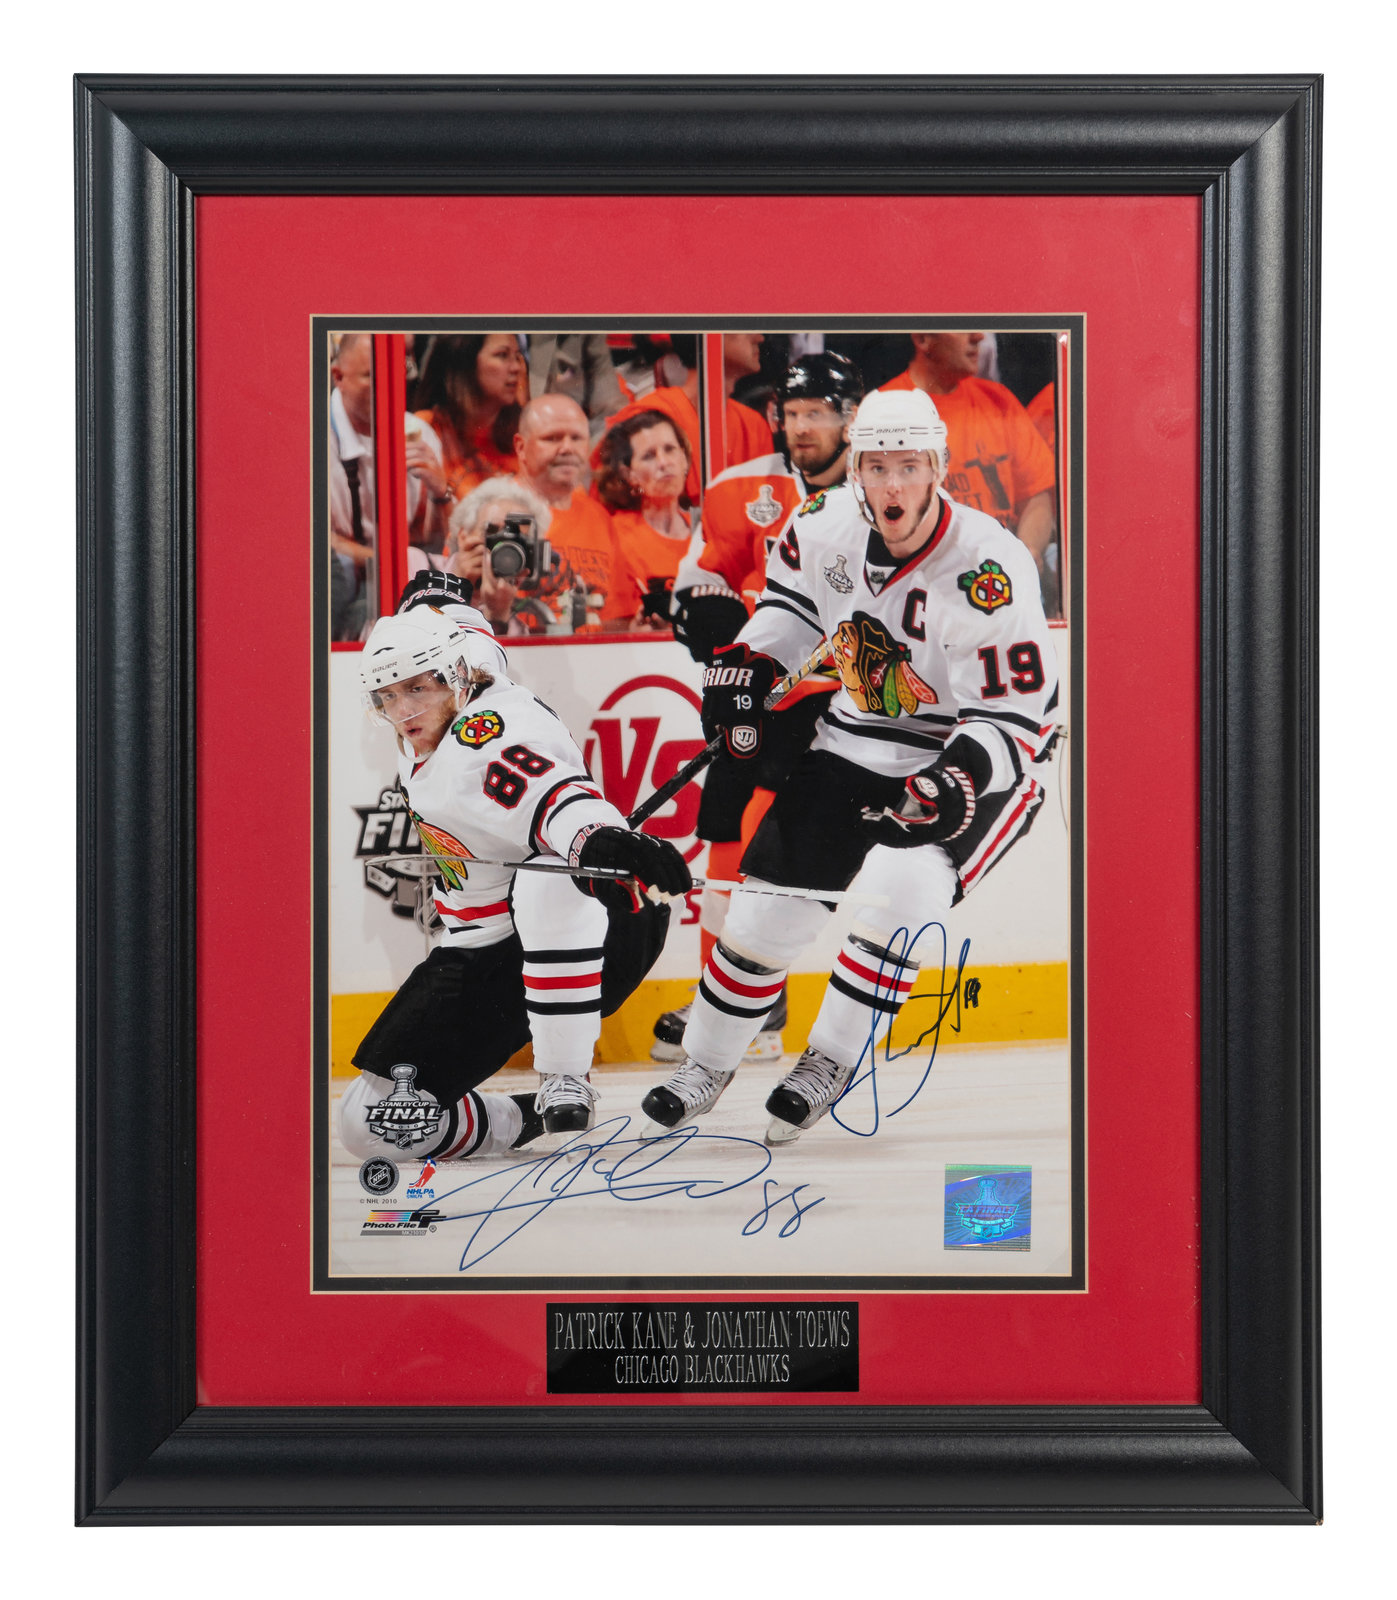 Online Hockey Memorabilia Auction: NHL and Hockey Collectibles